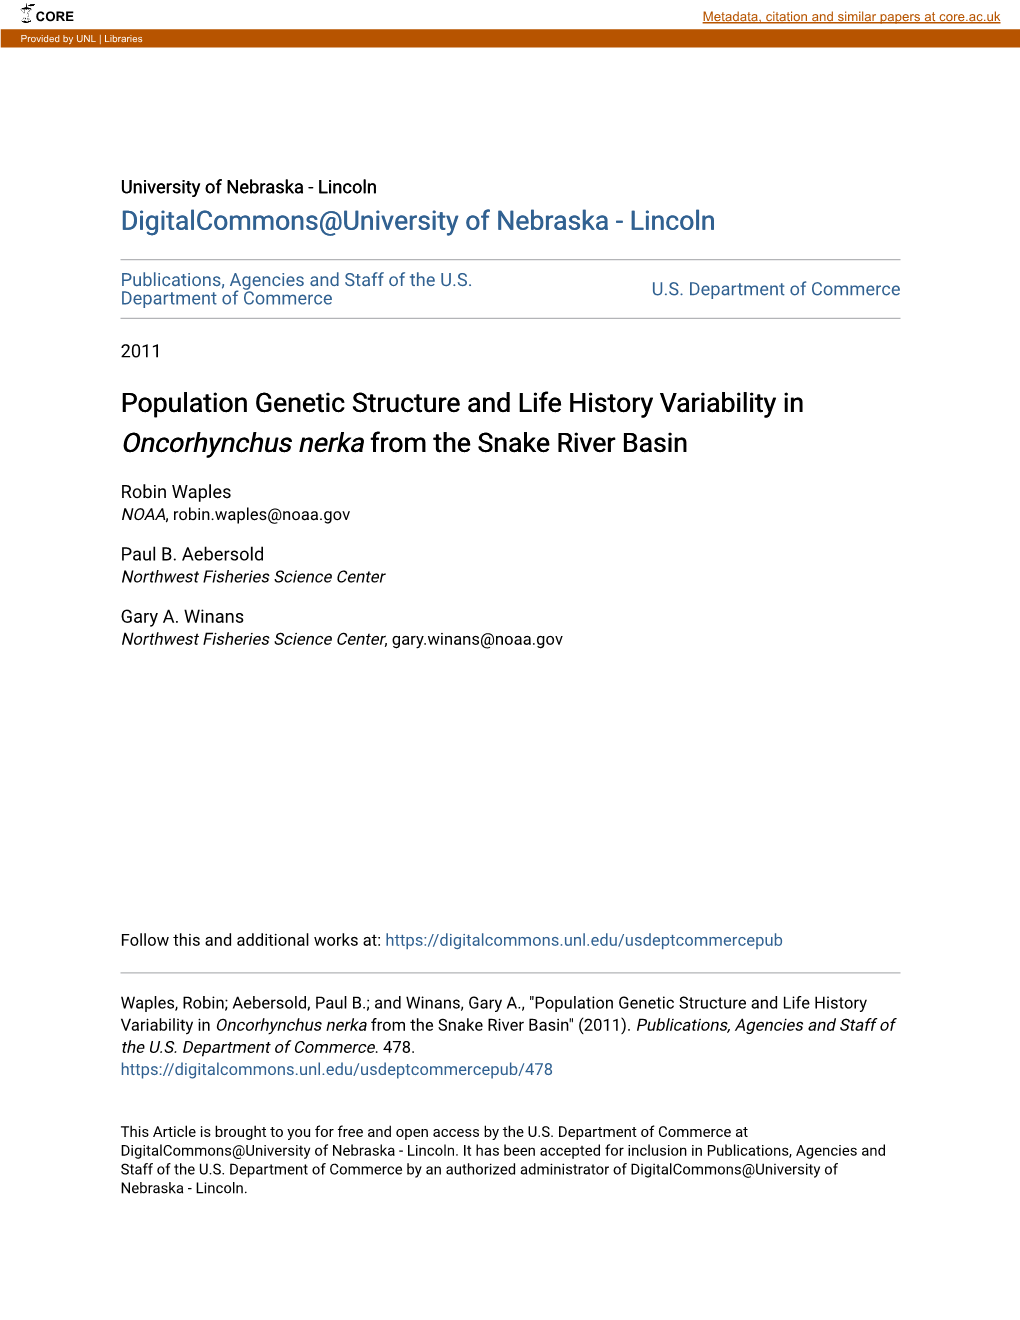 Population Genetic Structure and Life History Variability in Oncorhynchus Nerka from the Snake River Basin